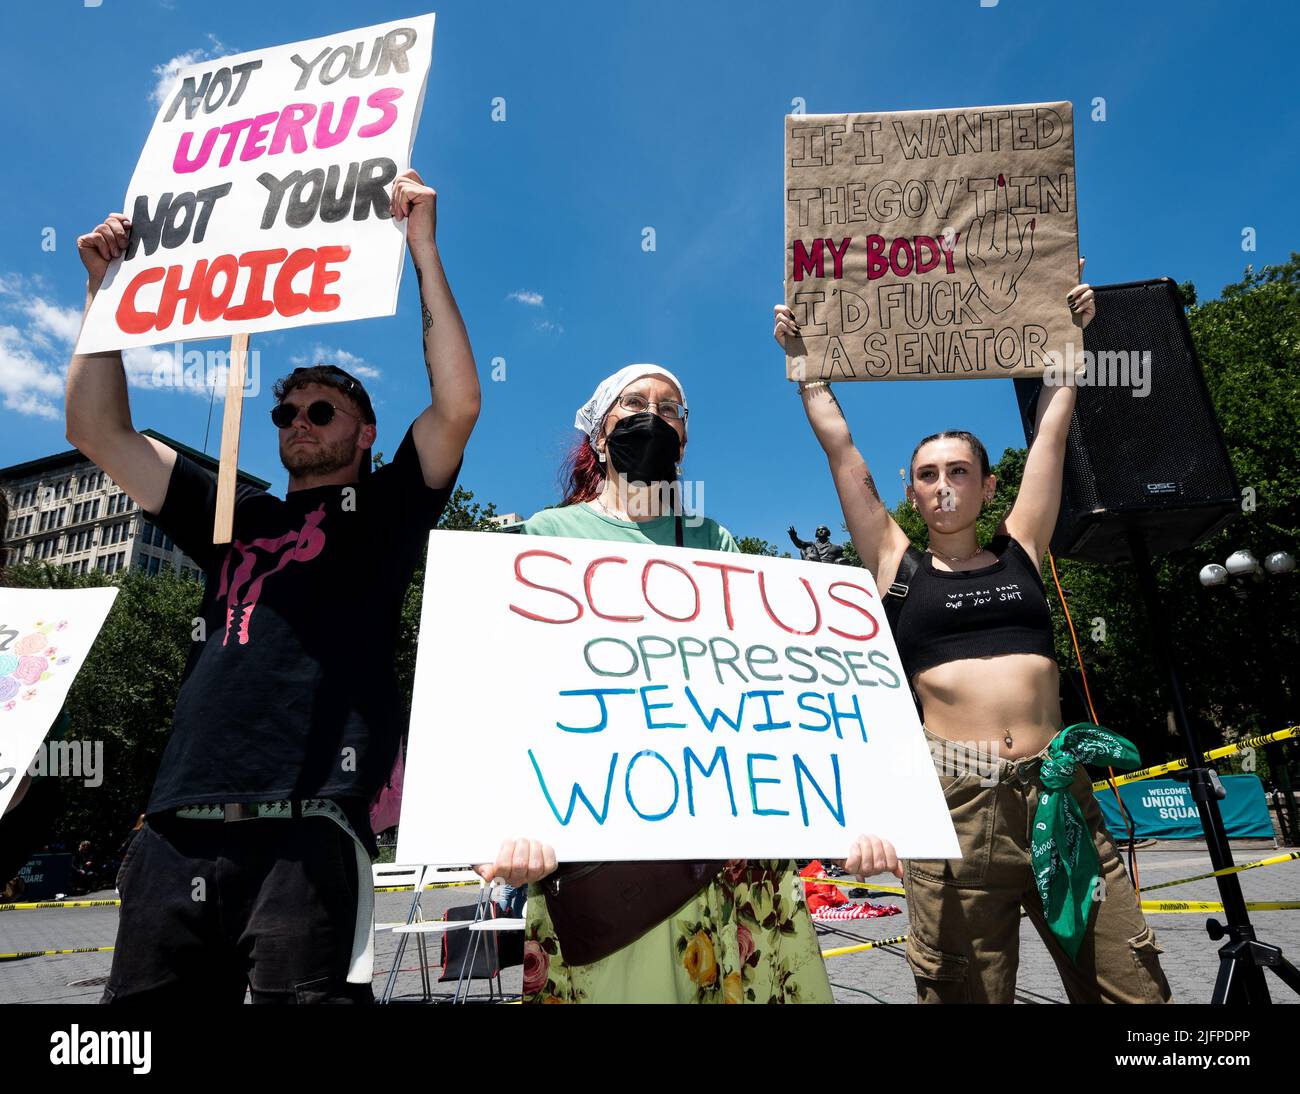 New York, United States. 04th July, 2022. People hold signs saying 'Not your uterus, not your choice', 'SCOTUS oppresses Jewish women' and 'If I wanted the gov't in my body then I'd f**k a Senator' at an abortion rights demonstration in New York City. Credit: SOPA Images Limited/Alamy Live News Stock Photo